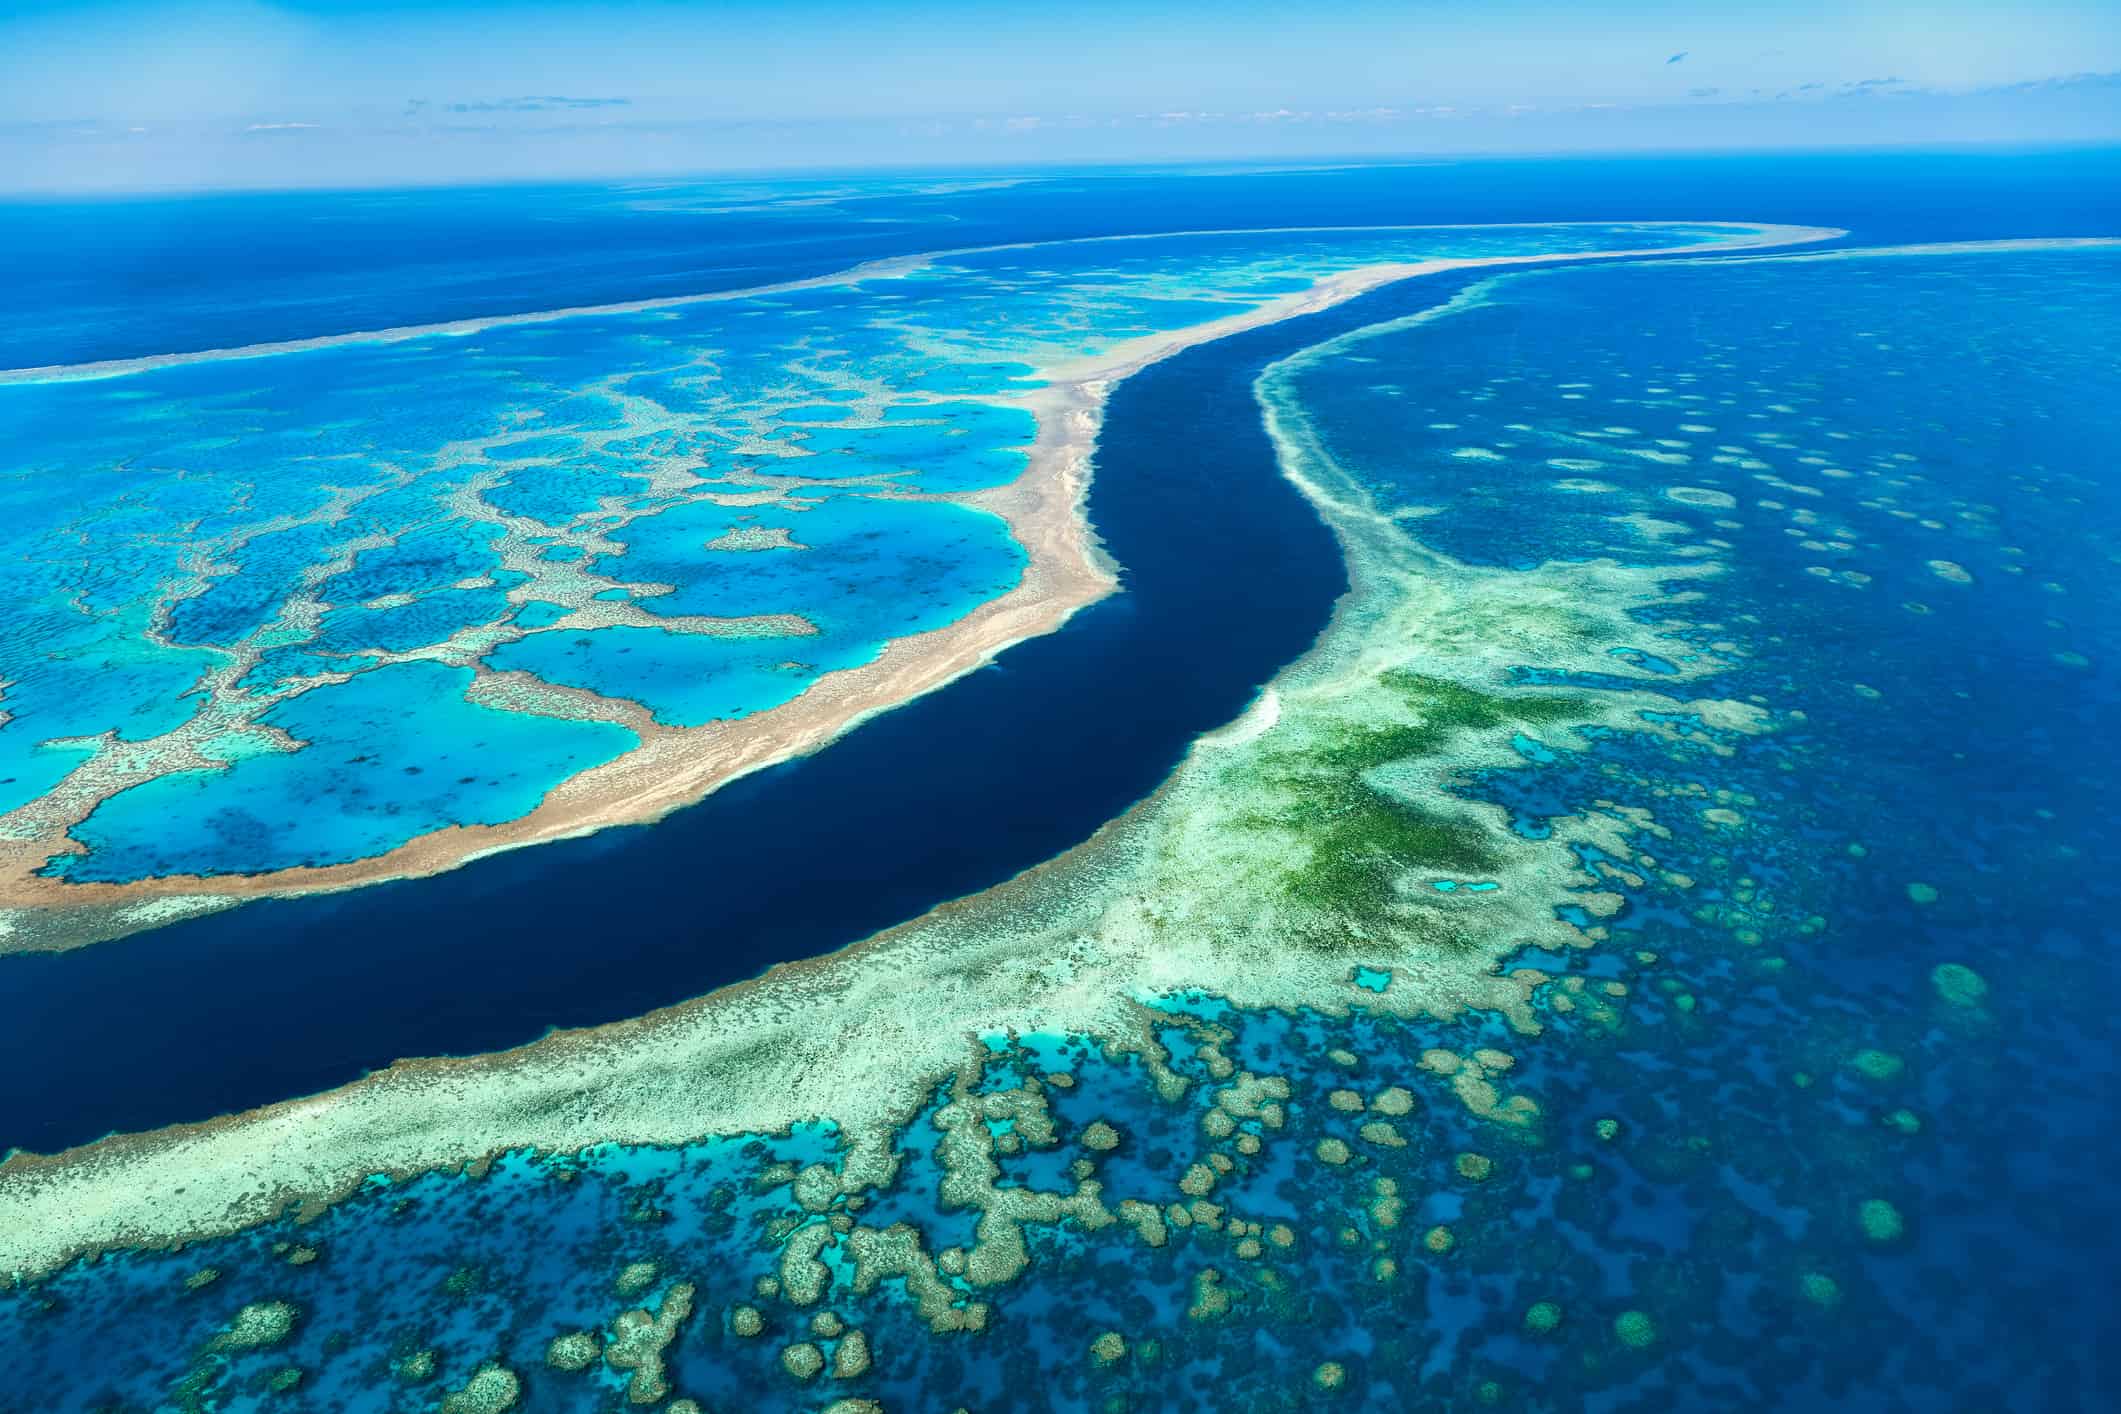 <p>Stretching for more than 1,600 miles along the coast of Australia, the <a href="https://whc.unesco.org/en/list/154" rel="noopener">Great Barrier Reef</a> is the largest living structure on Earth. That’s right, it’s made entirely by living organisms! Built by billions of coral polyps, the <a href="https://a-z-animals.com/blog/largest-coral-reef-in-the-world/?utm_campaign=msn&utm_source=msn_slideshow&utm_content=1329881&utm_medium=in_content">Great Barrier Reef</a> covers 133,000 square miles and is so big that you can even see it from outer space! These tiny animals attach themselves to hard surfaces like submerged rocks, where they form hard skeletons by secreting calcium carbonate. Generations of these coral polyps have collected over time to form the Great Barrier Reef we see today. </p><p>Sharks, lions, alligators, and more! Don’t miss today’s latest and most exciting animal news. <strong><a href="https://www.msn.com/en-us/channel/source/AZ%20Animals%20US/sr-vid-7etr9q8xun6k6508c3nufaum0de3dqktiq6h27ddeagnfug30wka">Click here to access the A-Z Animals profile page</a> and be sure to hit the <em>Follow</em> button here or at the top of this article! </strong></p> <p>Have feedback? Add a comment below!</p>